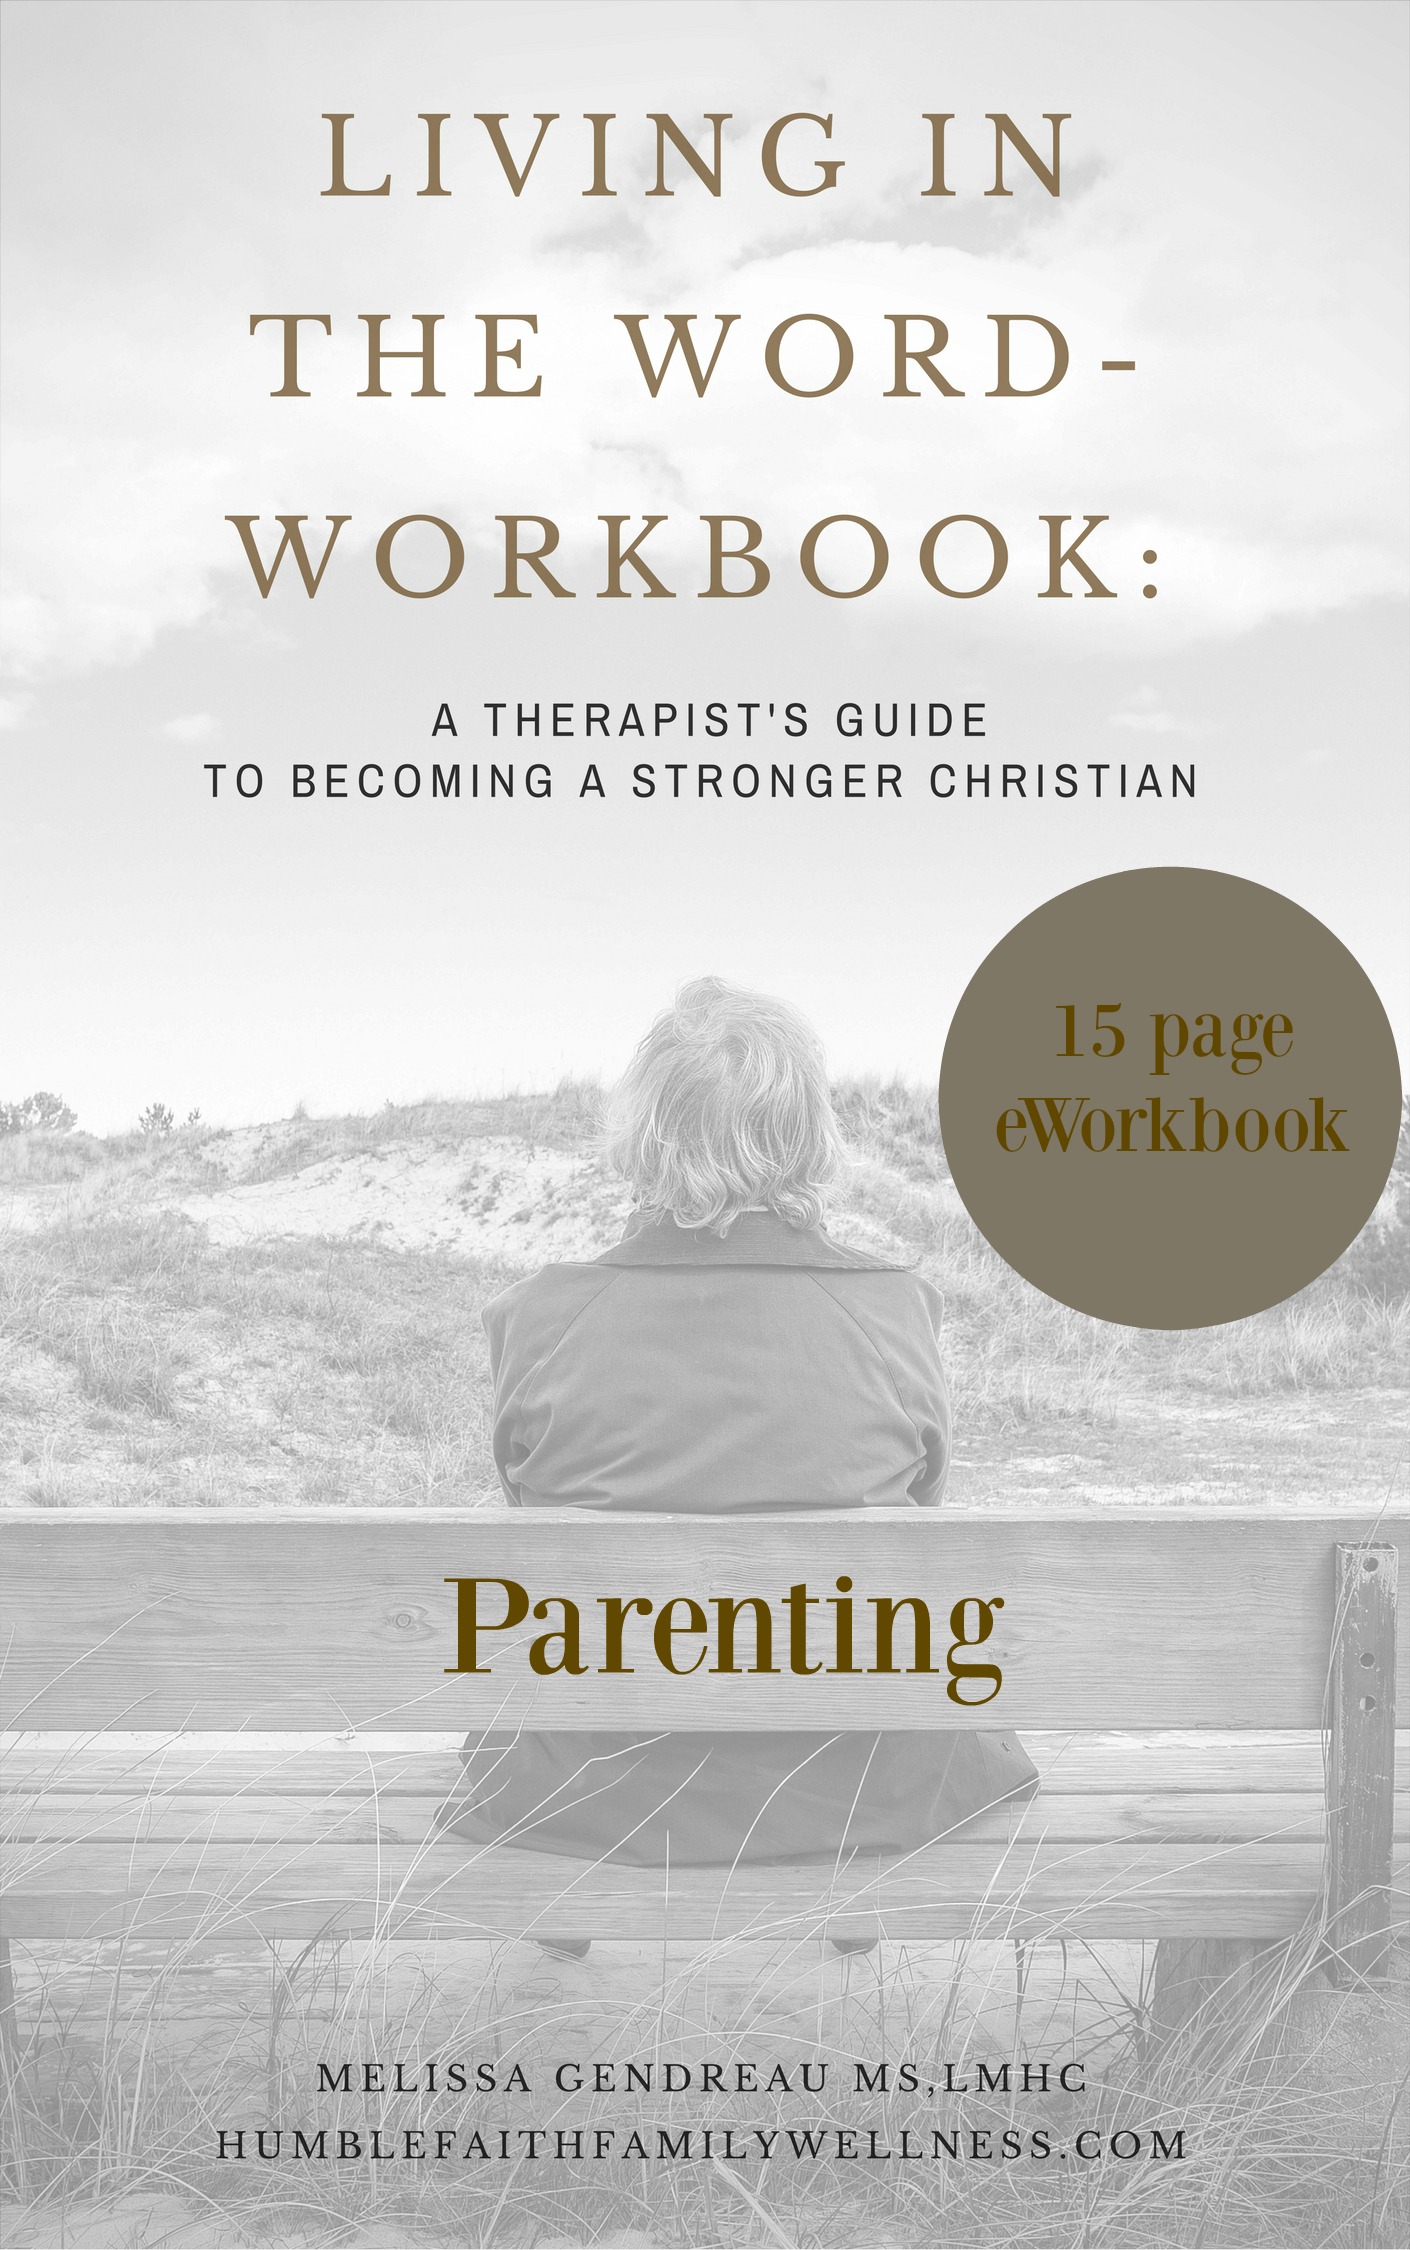 The Living in the Word eWorkbook: Parenting section will walk you through a series of questions and worksheets to acknowledge your strengths and address your areas of growth. The section is only $1.50